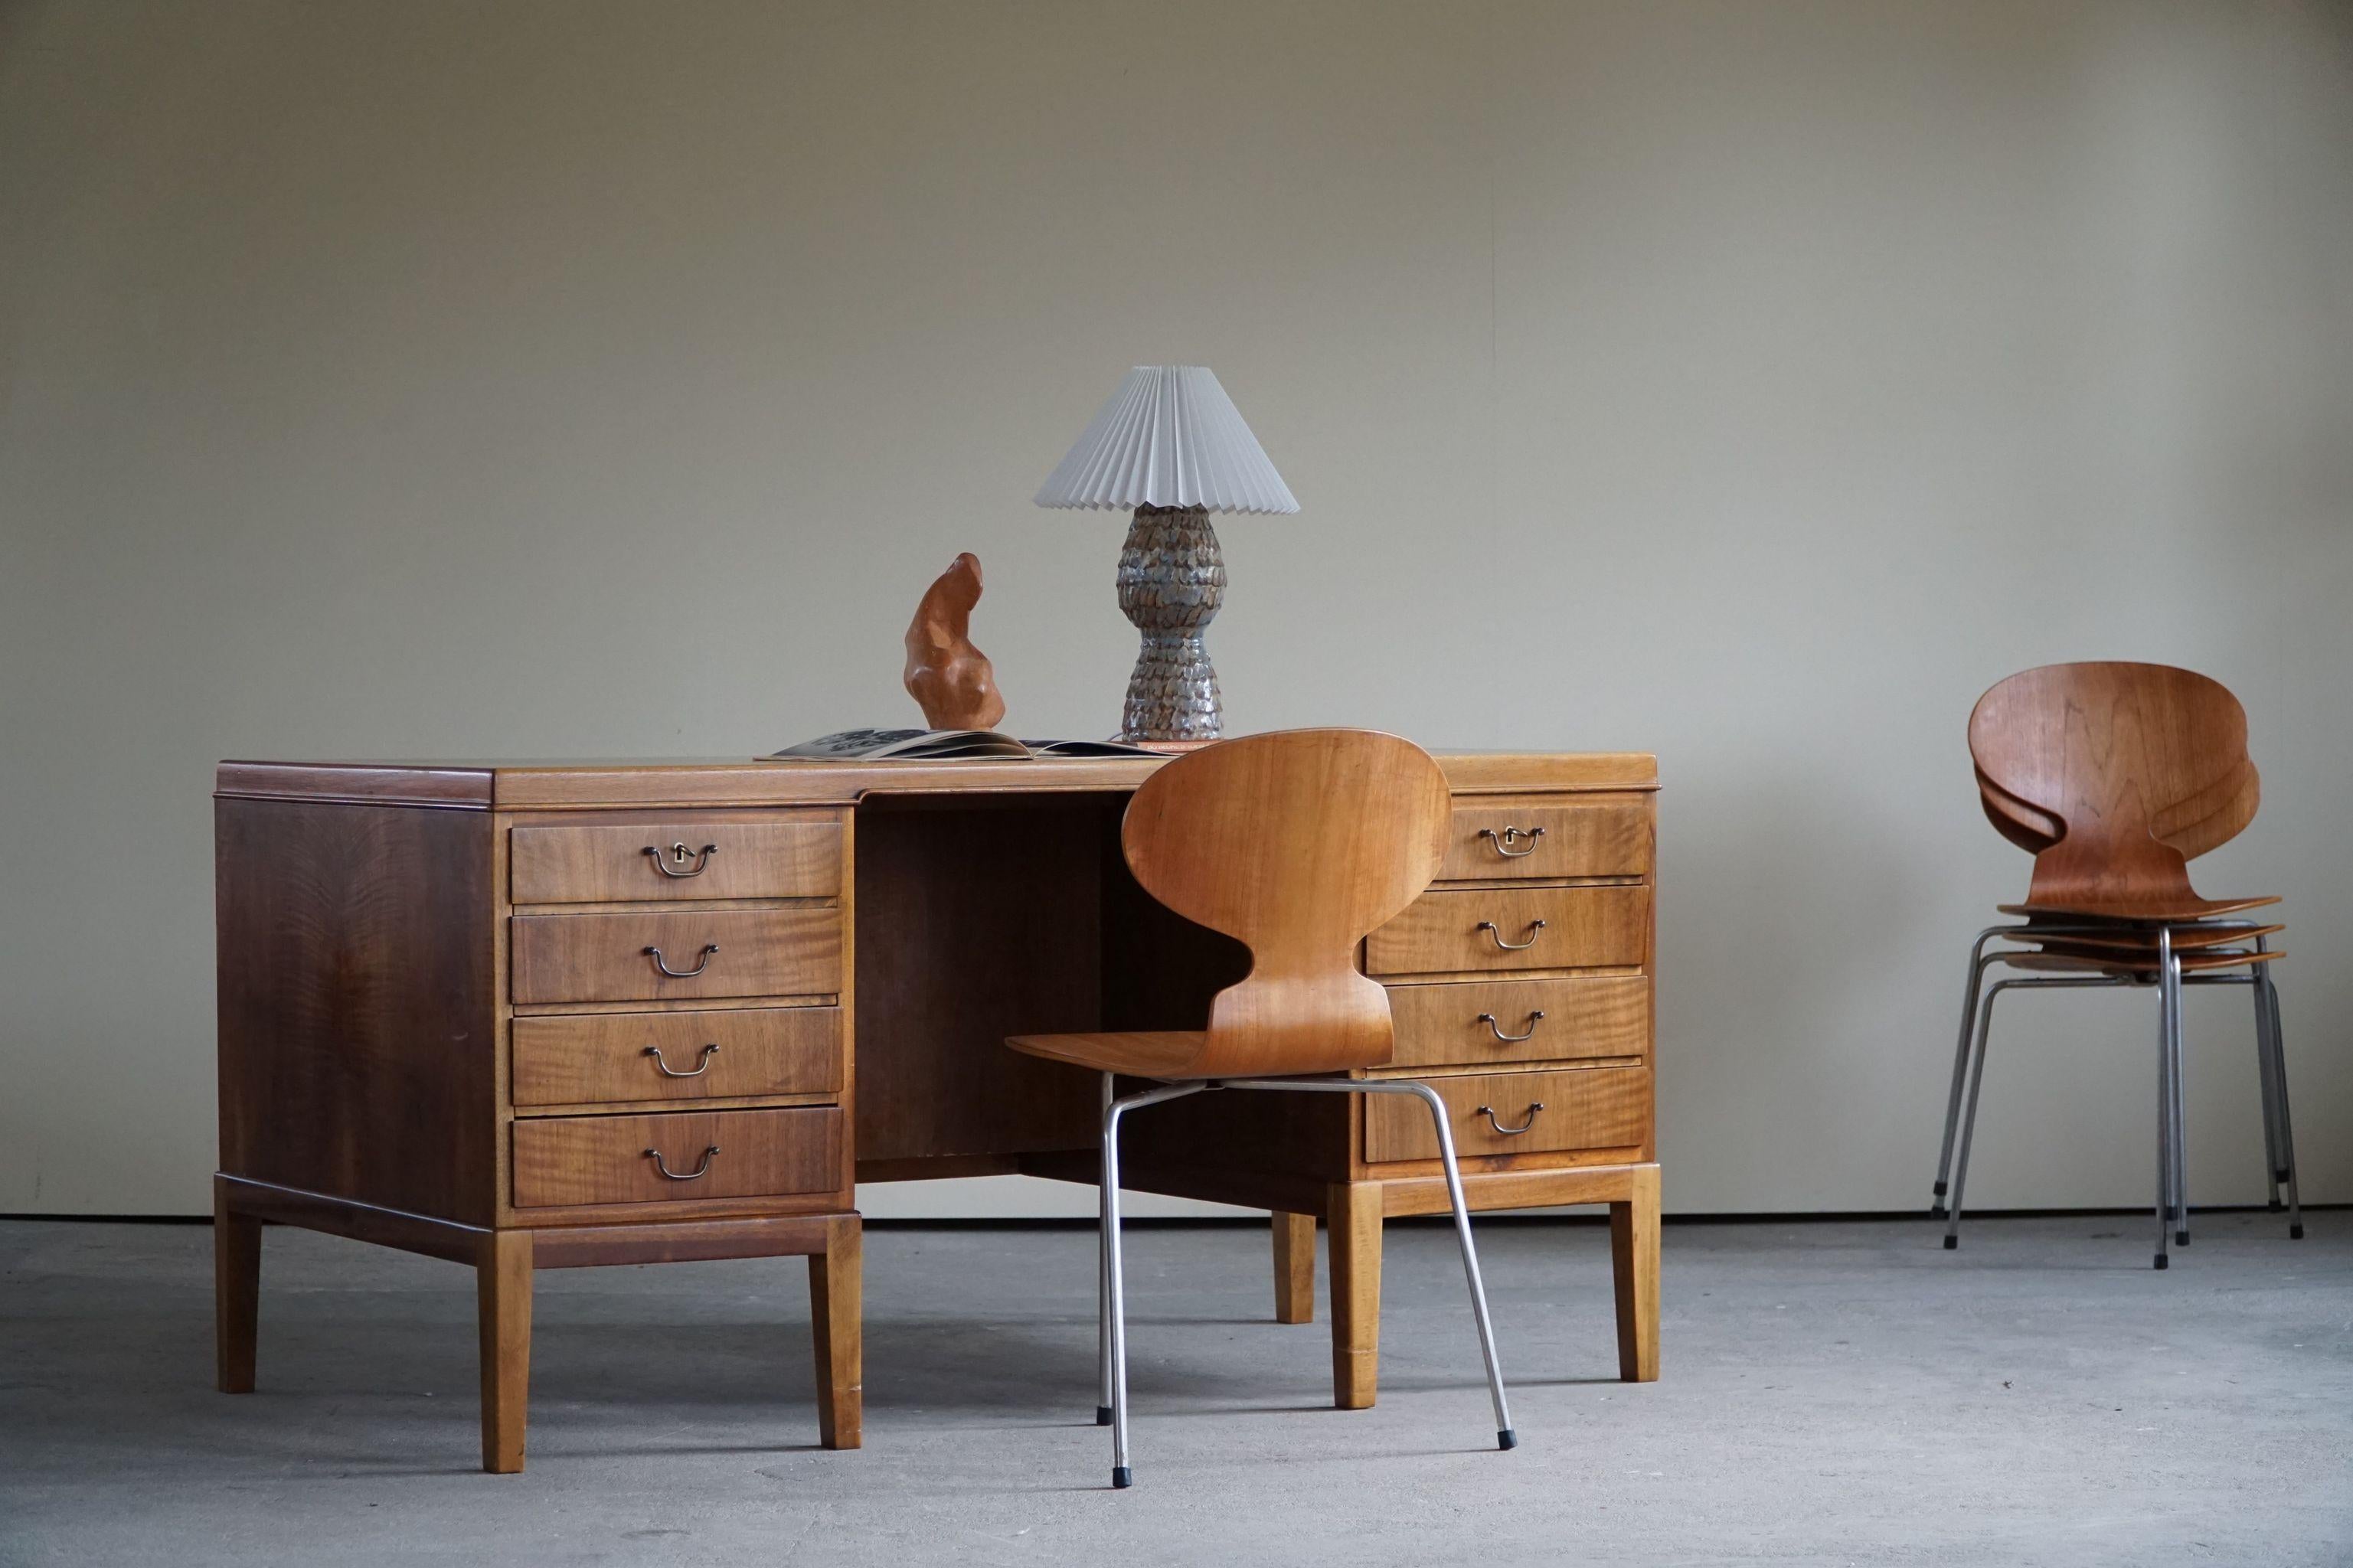 Large Freestanding Danish modern office desk in walnut, with brass handles. Made in 1940s.
Attributed to Danish architect Ole Wanscher.

A beautiful classic piece in a great vintage condition.